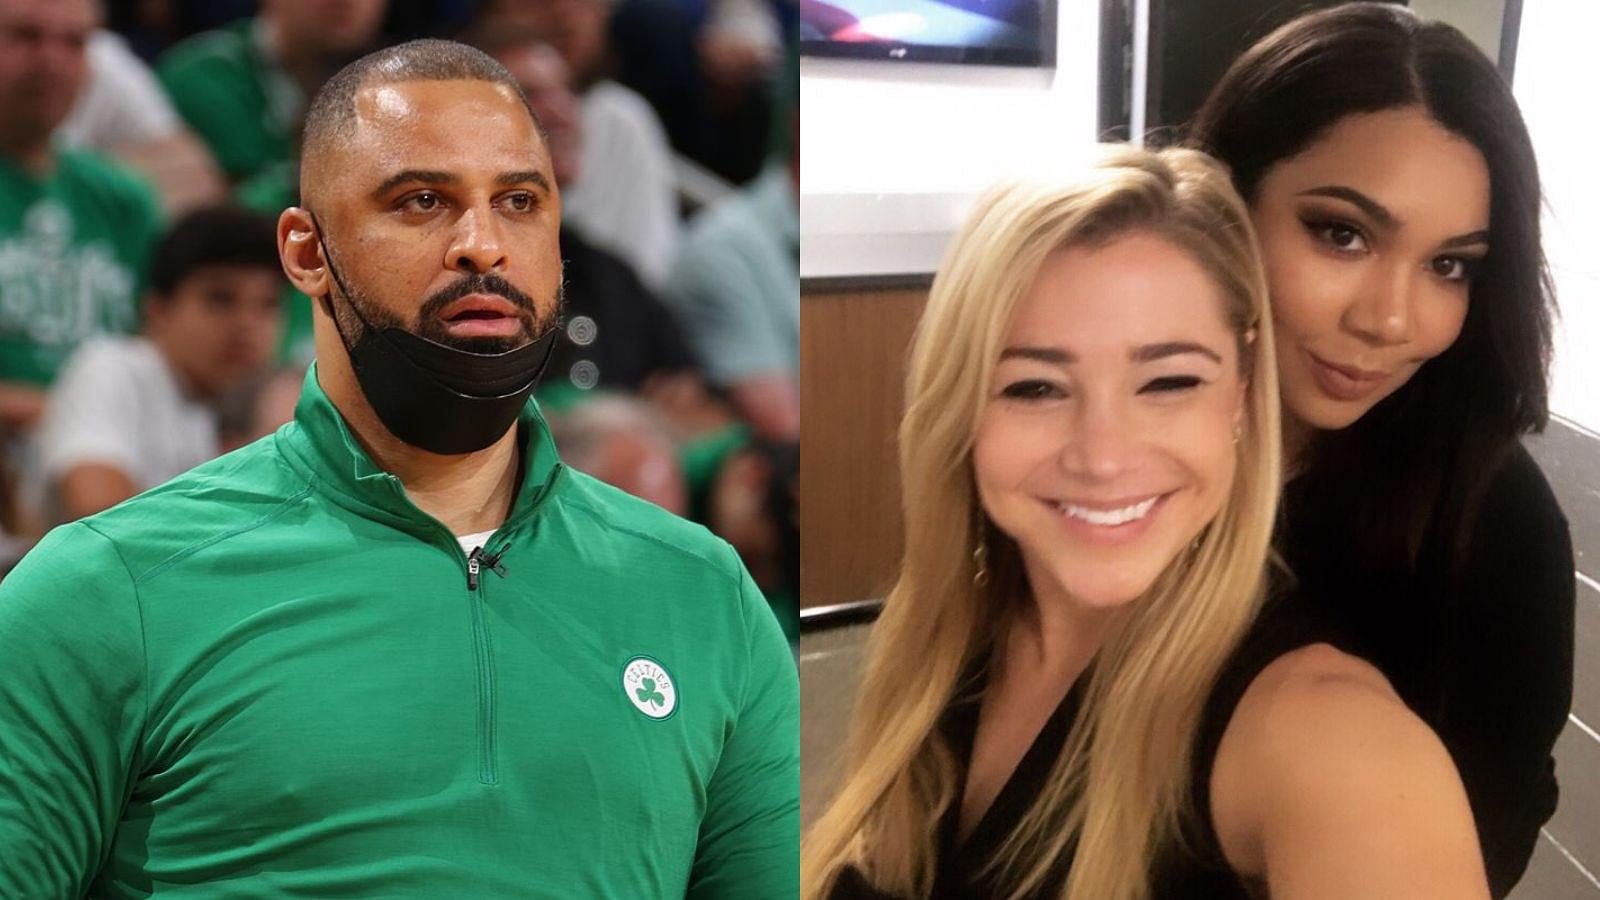 “As a female in Celtics organisation, last few days have been heartbreaking”: Amanda Pflugrad, a reporter working for C’s opens up on rumours surrounding Ime Udoka